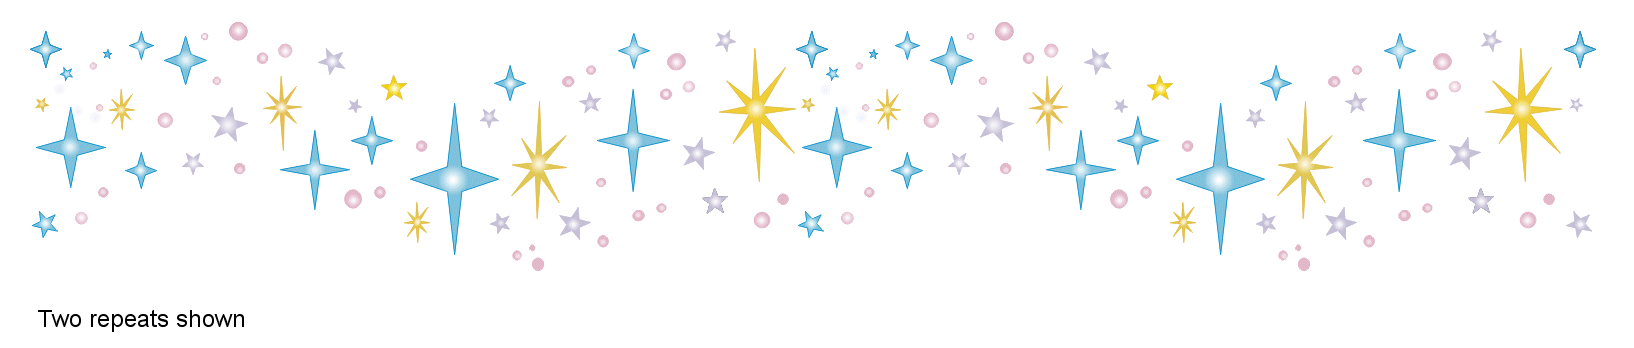 Free Fairy Dust Cliparts, Download Free Clip Art, Free Clip